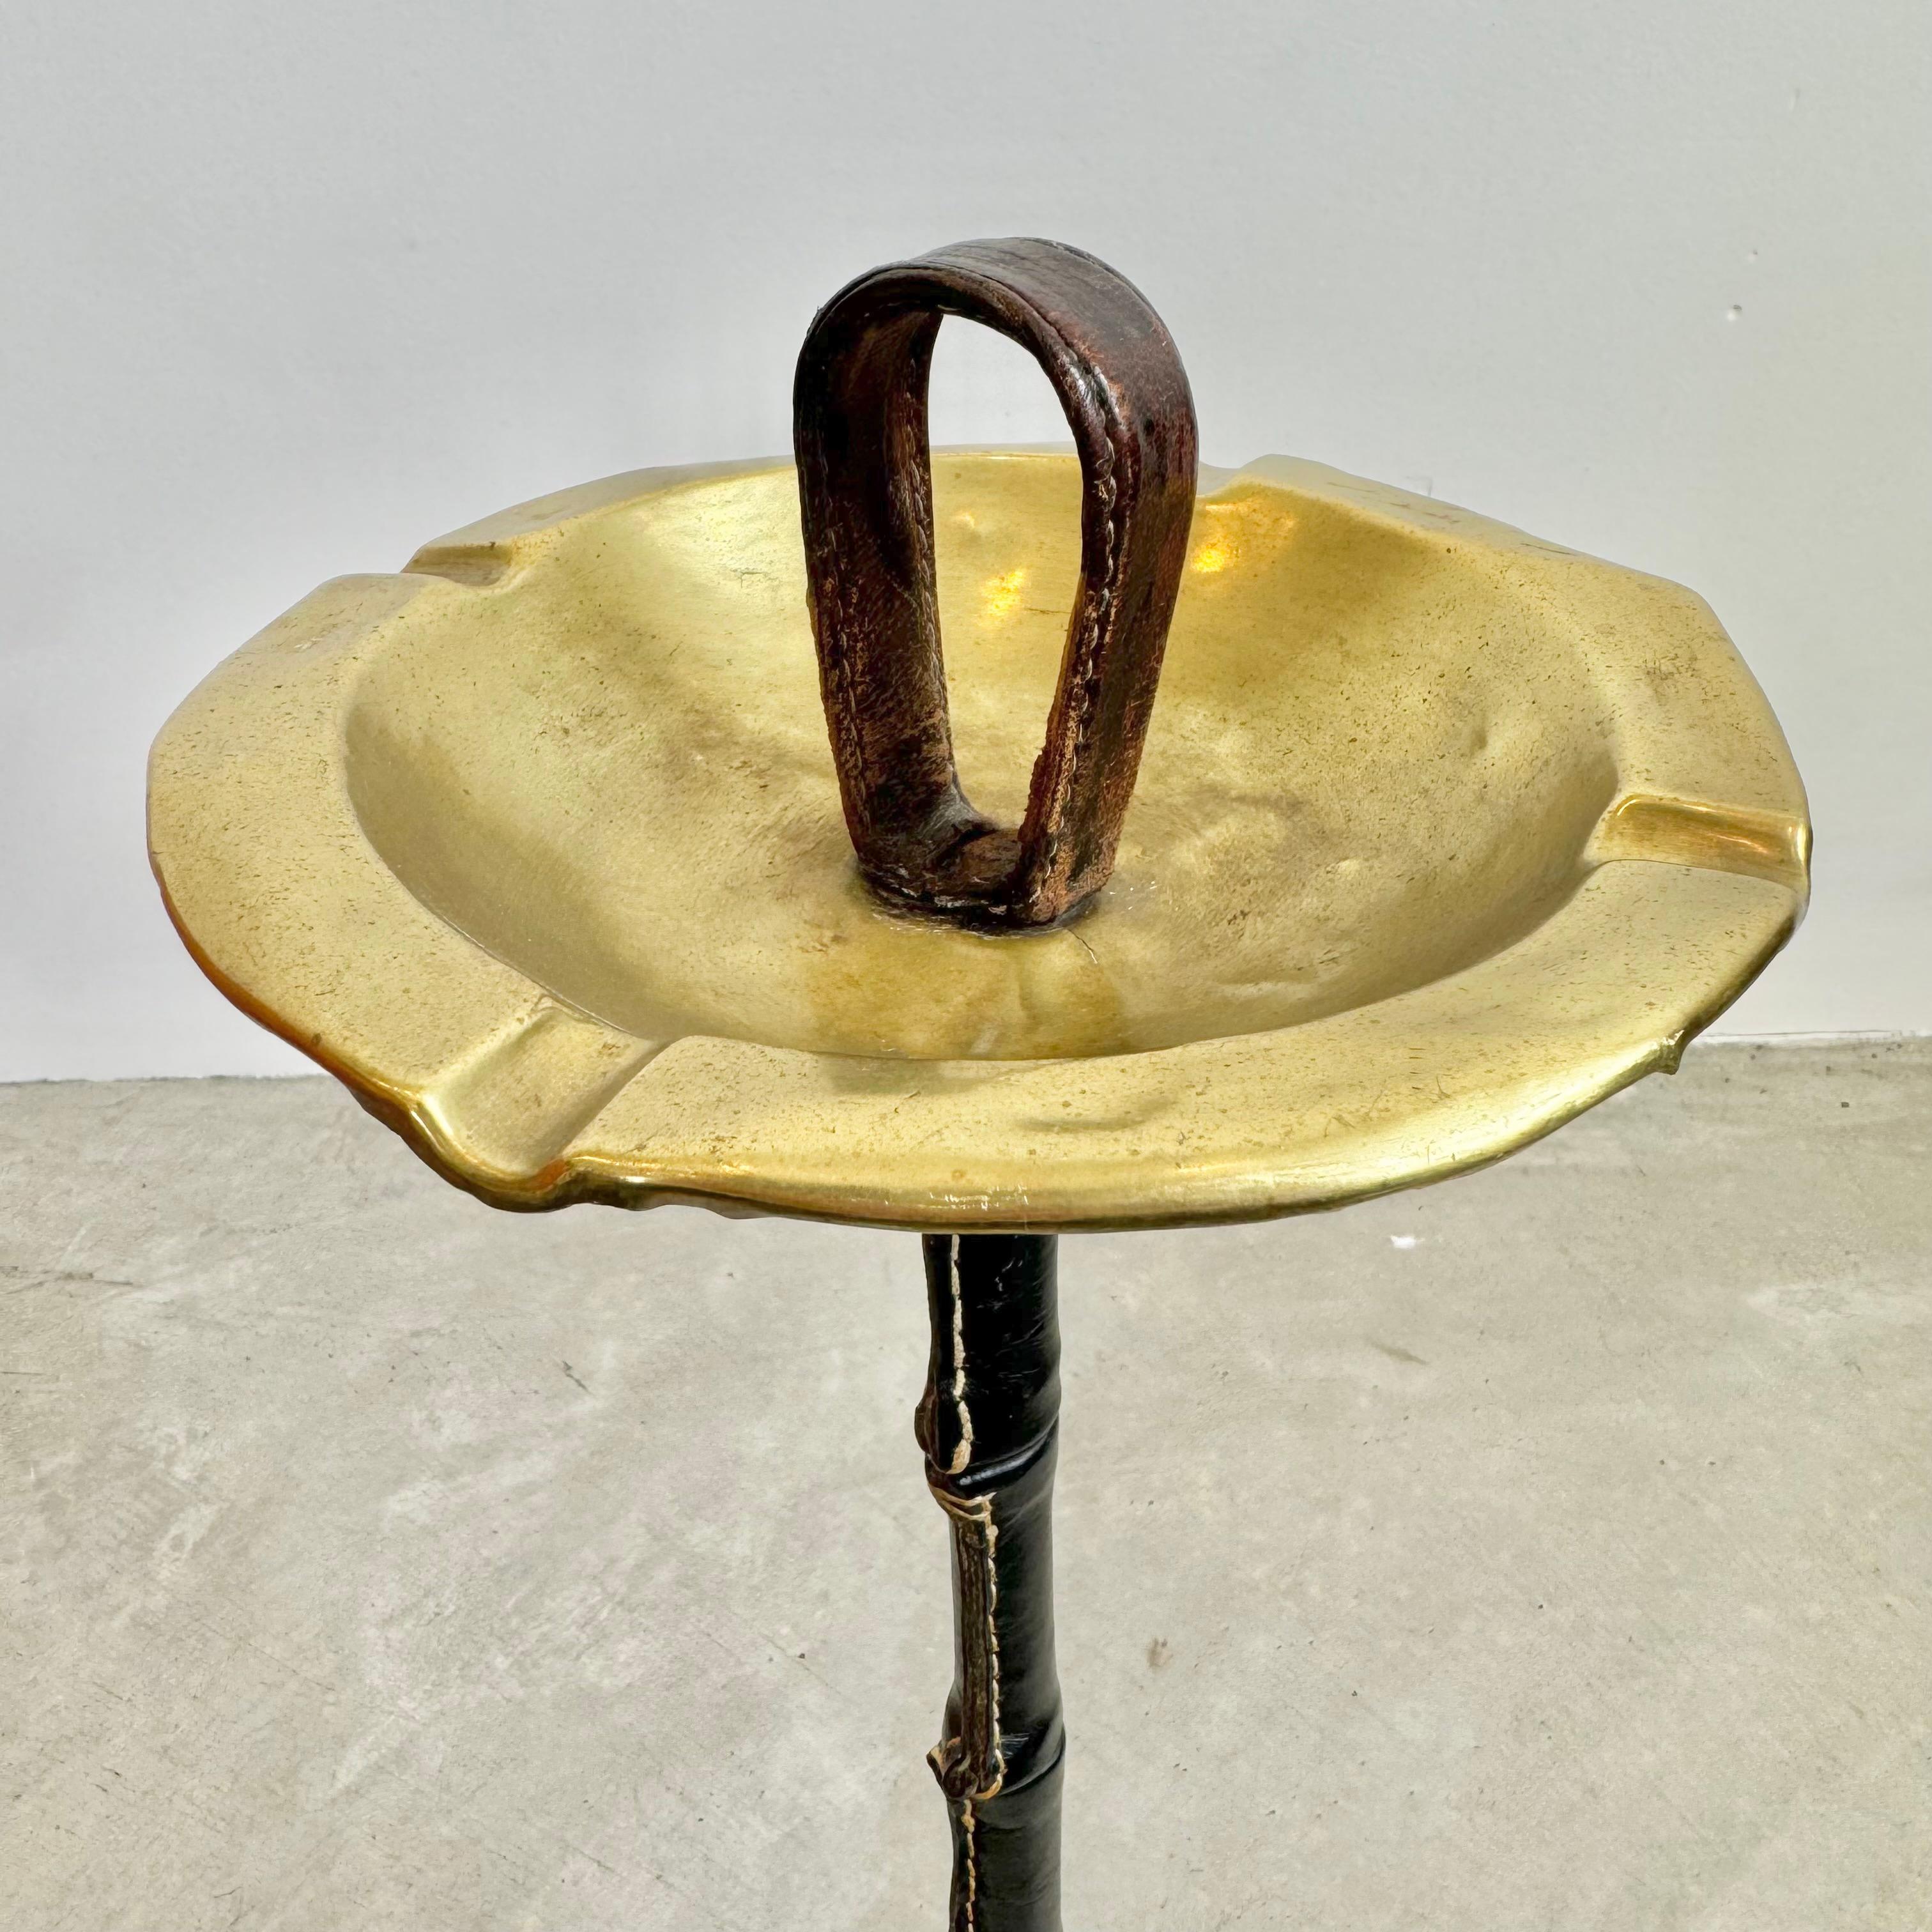 Jacques Adnet Leather and Brass Floor Ashtray, 1950s France For Sale 8